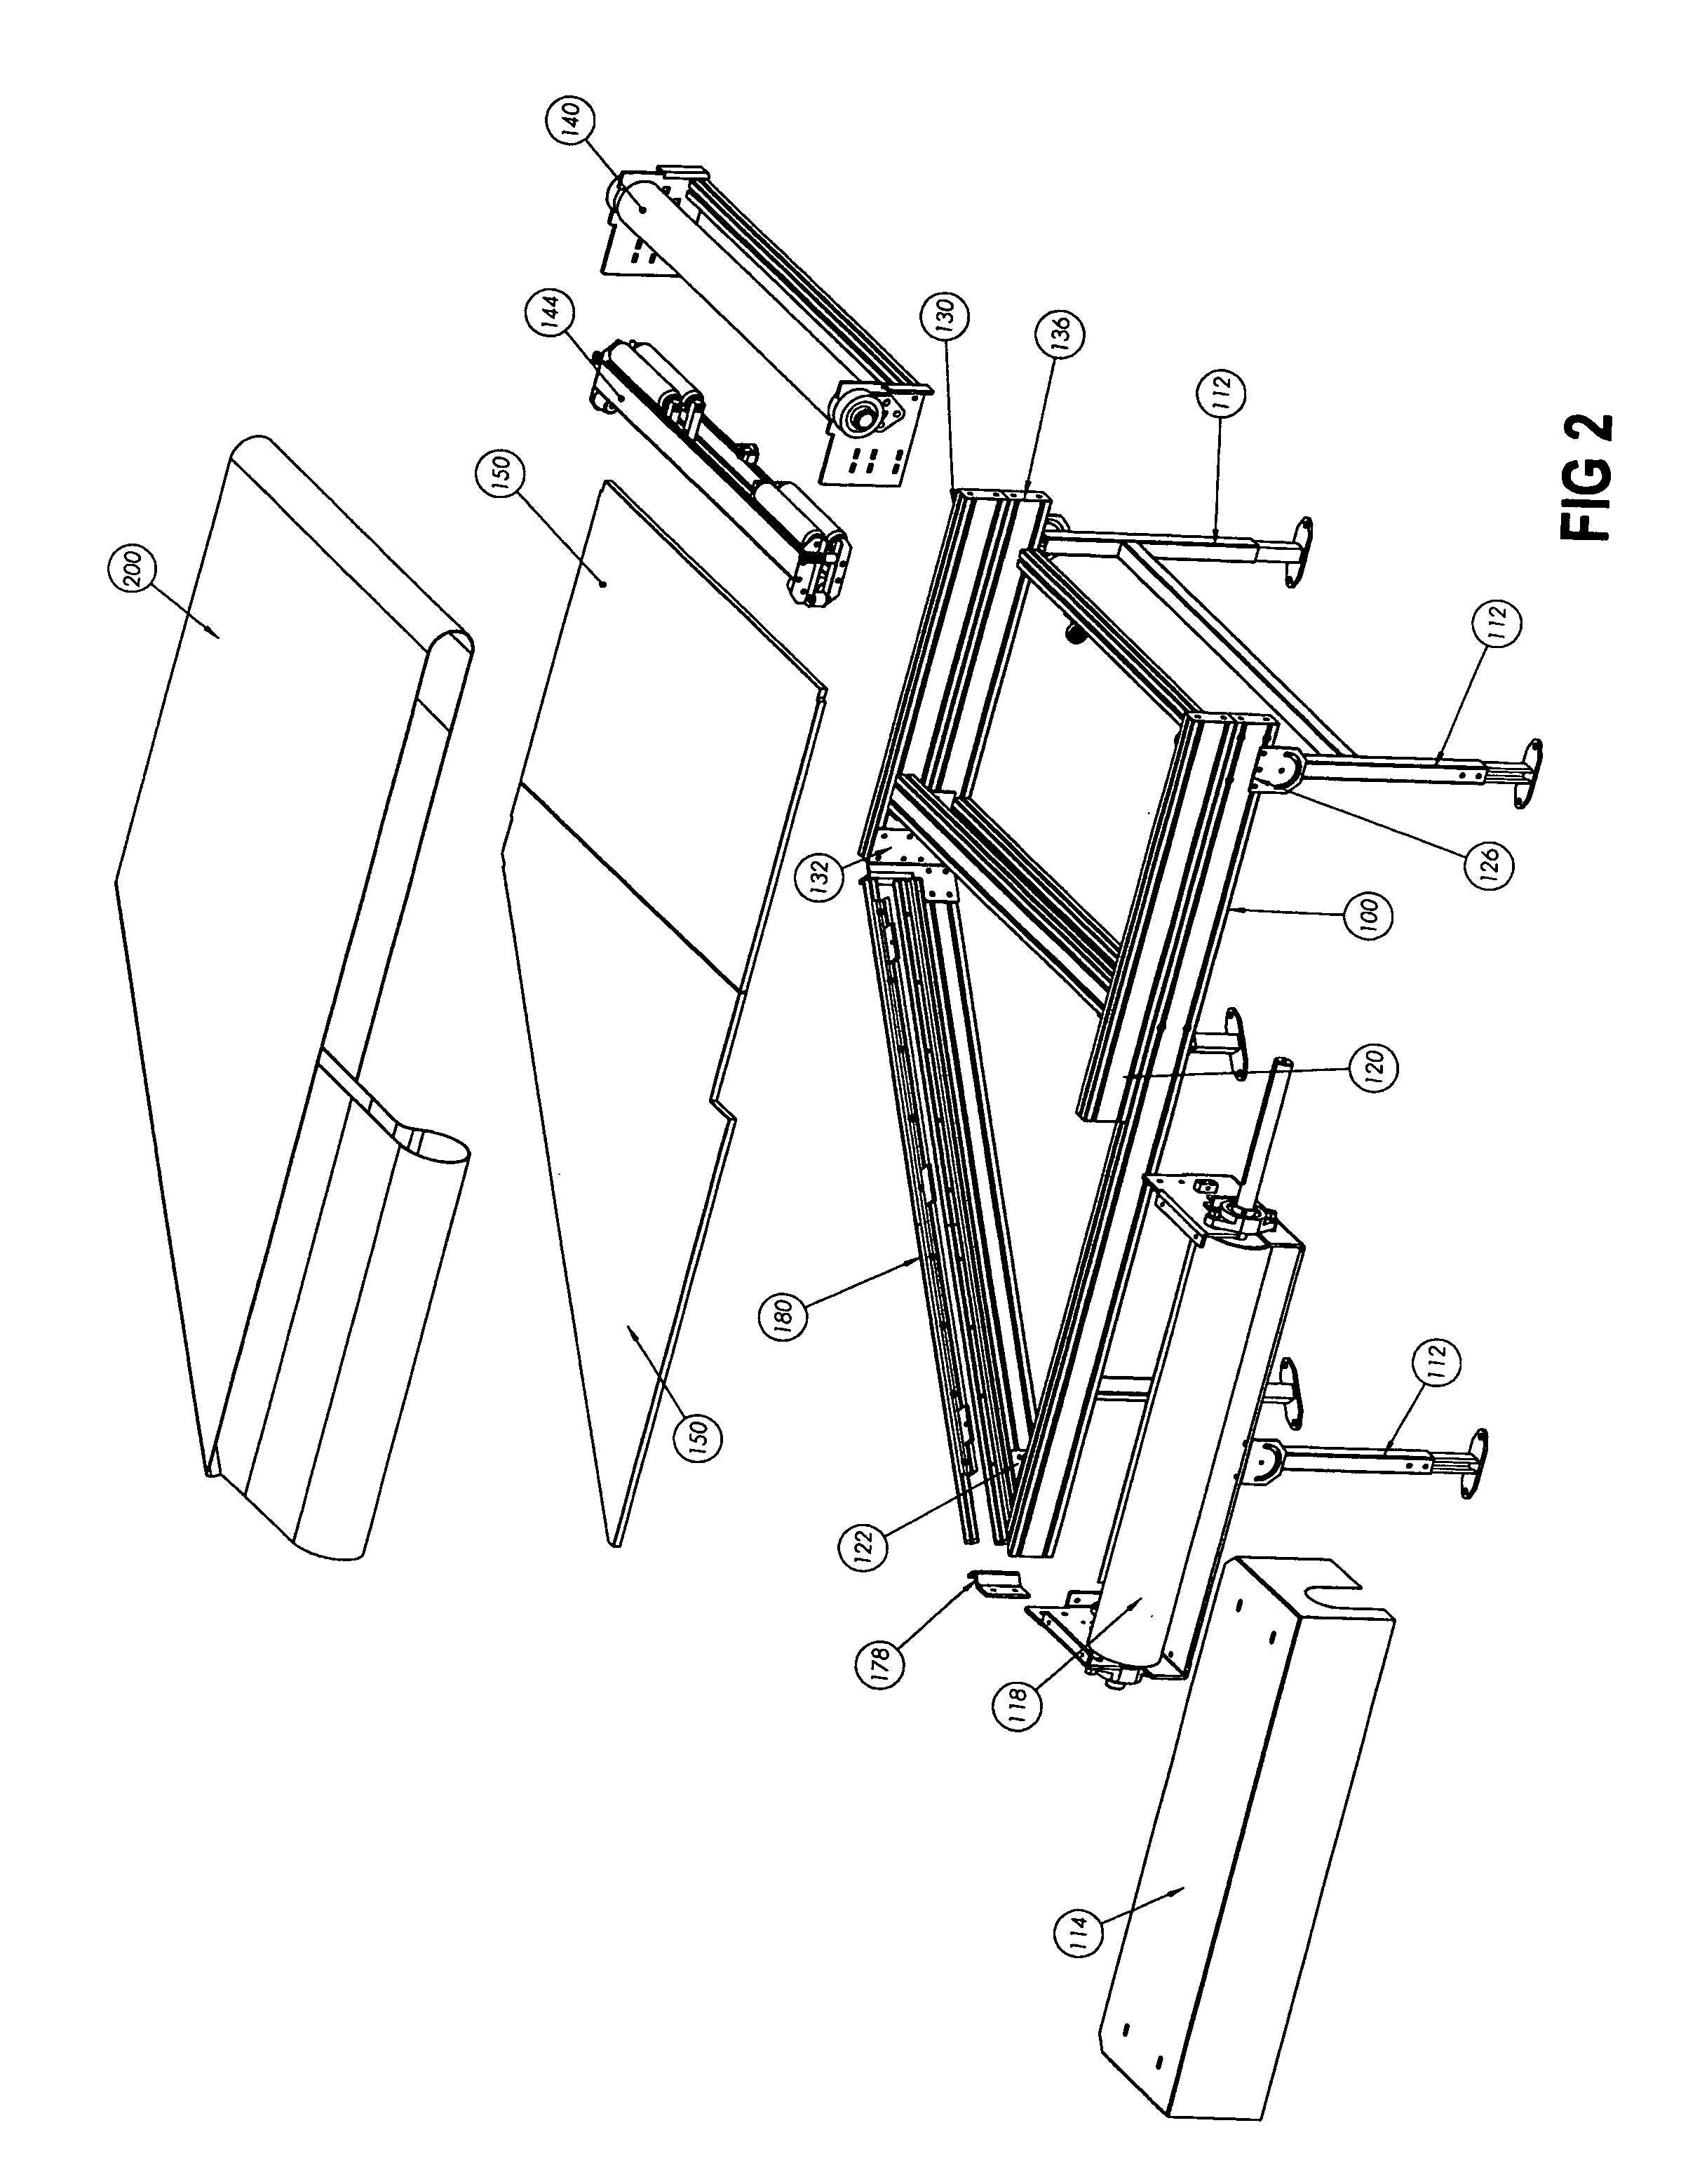 Merge/diverge conveying apparatus and method of providing a conveyor belt for a merge/diverge apparatus